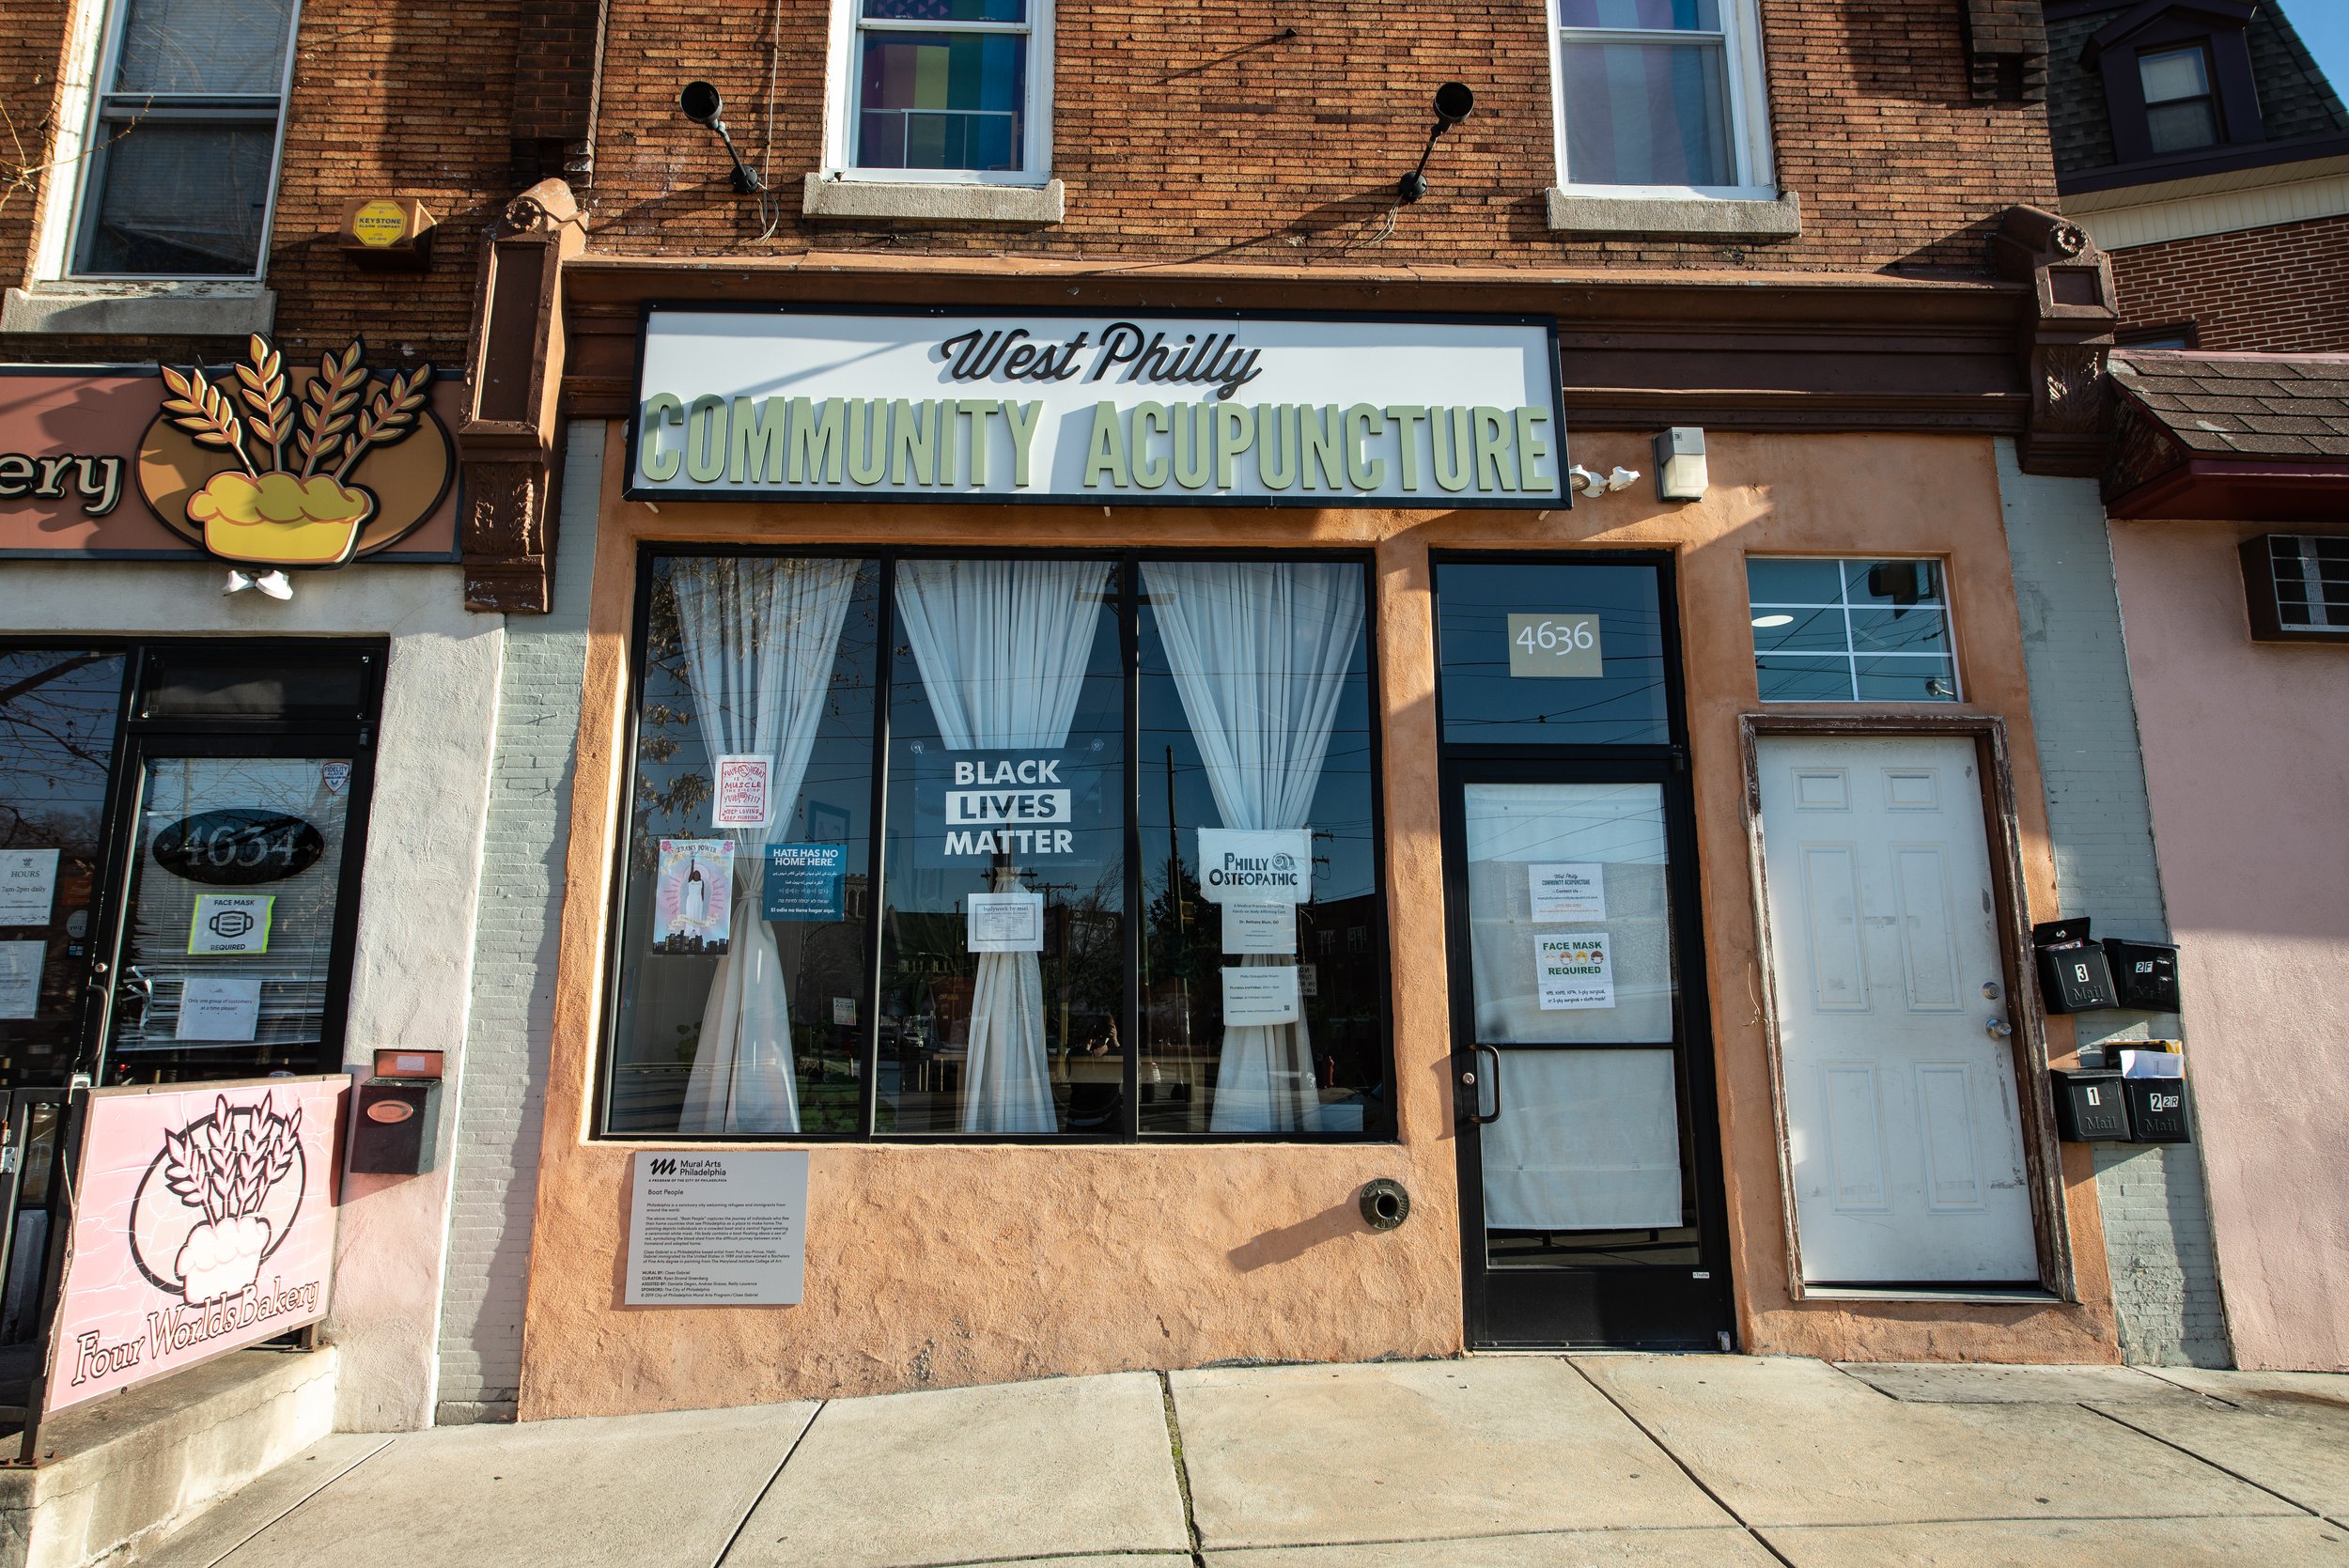  image description: The exterior of a brick building. A sign is hung over three large windows and the front door that reads ‘West Philly Community Acupuncture’ in a bold font.  